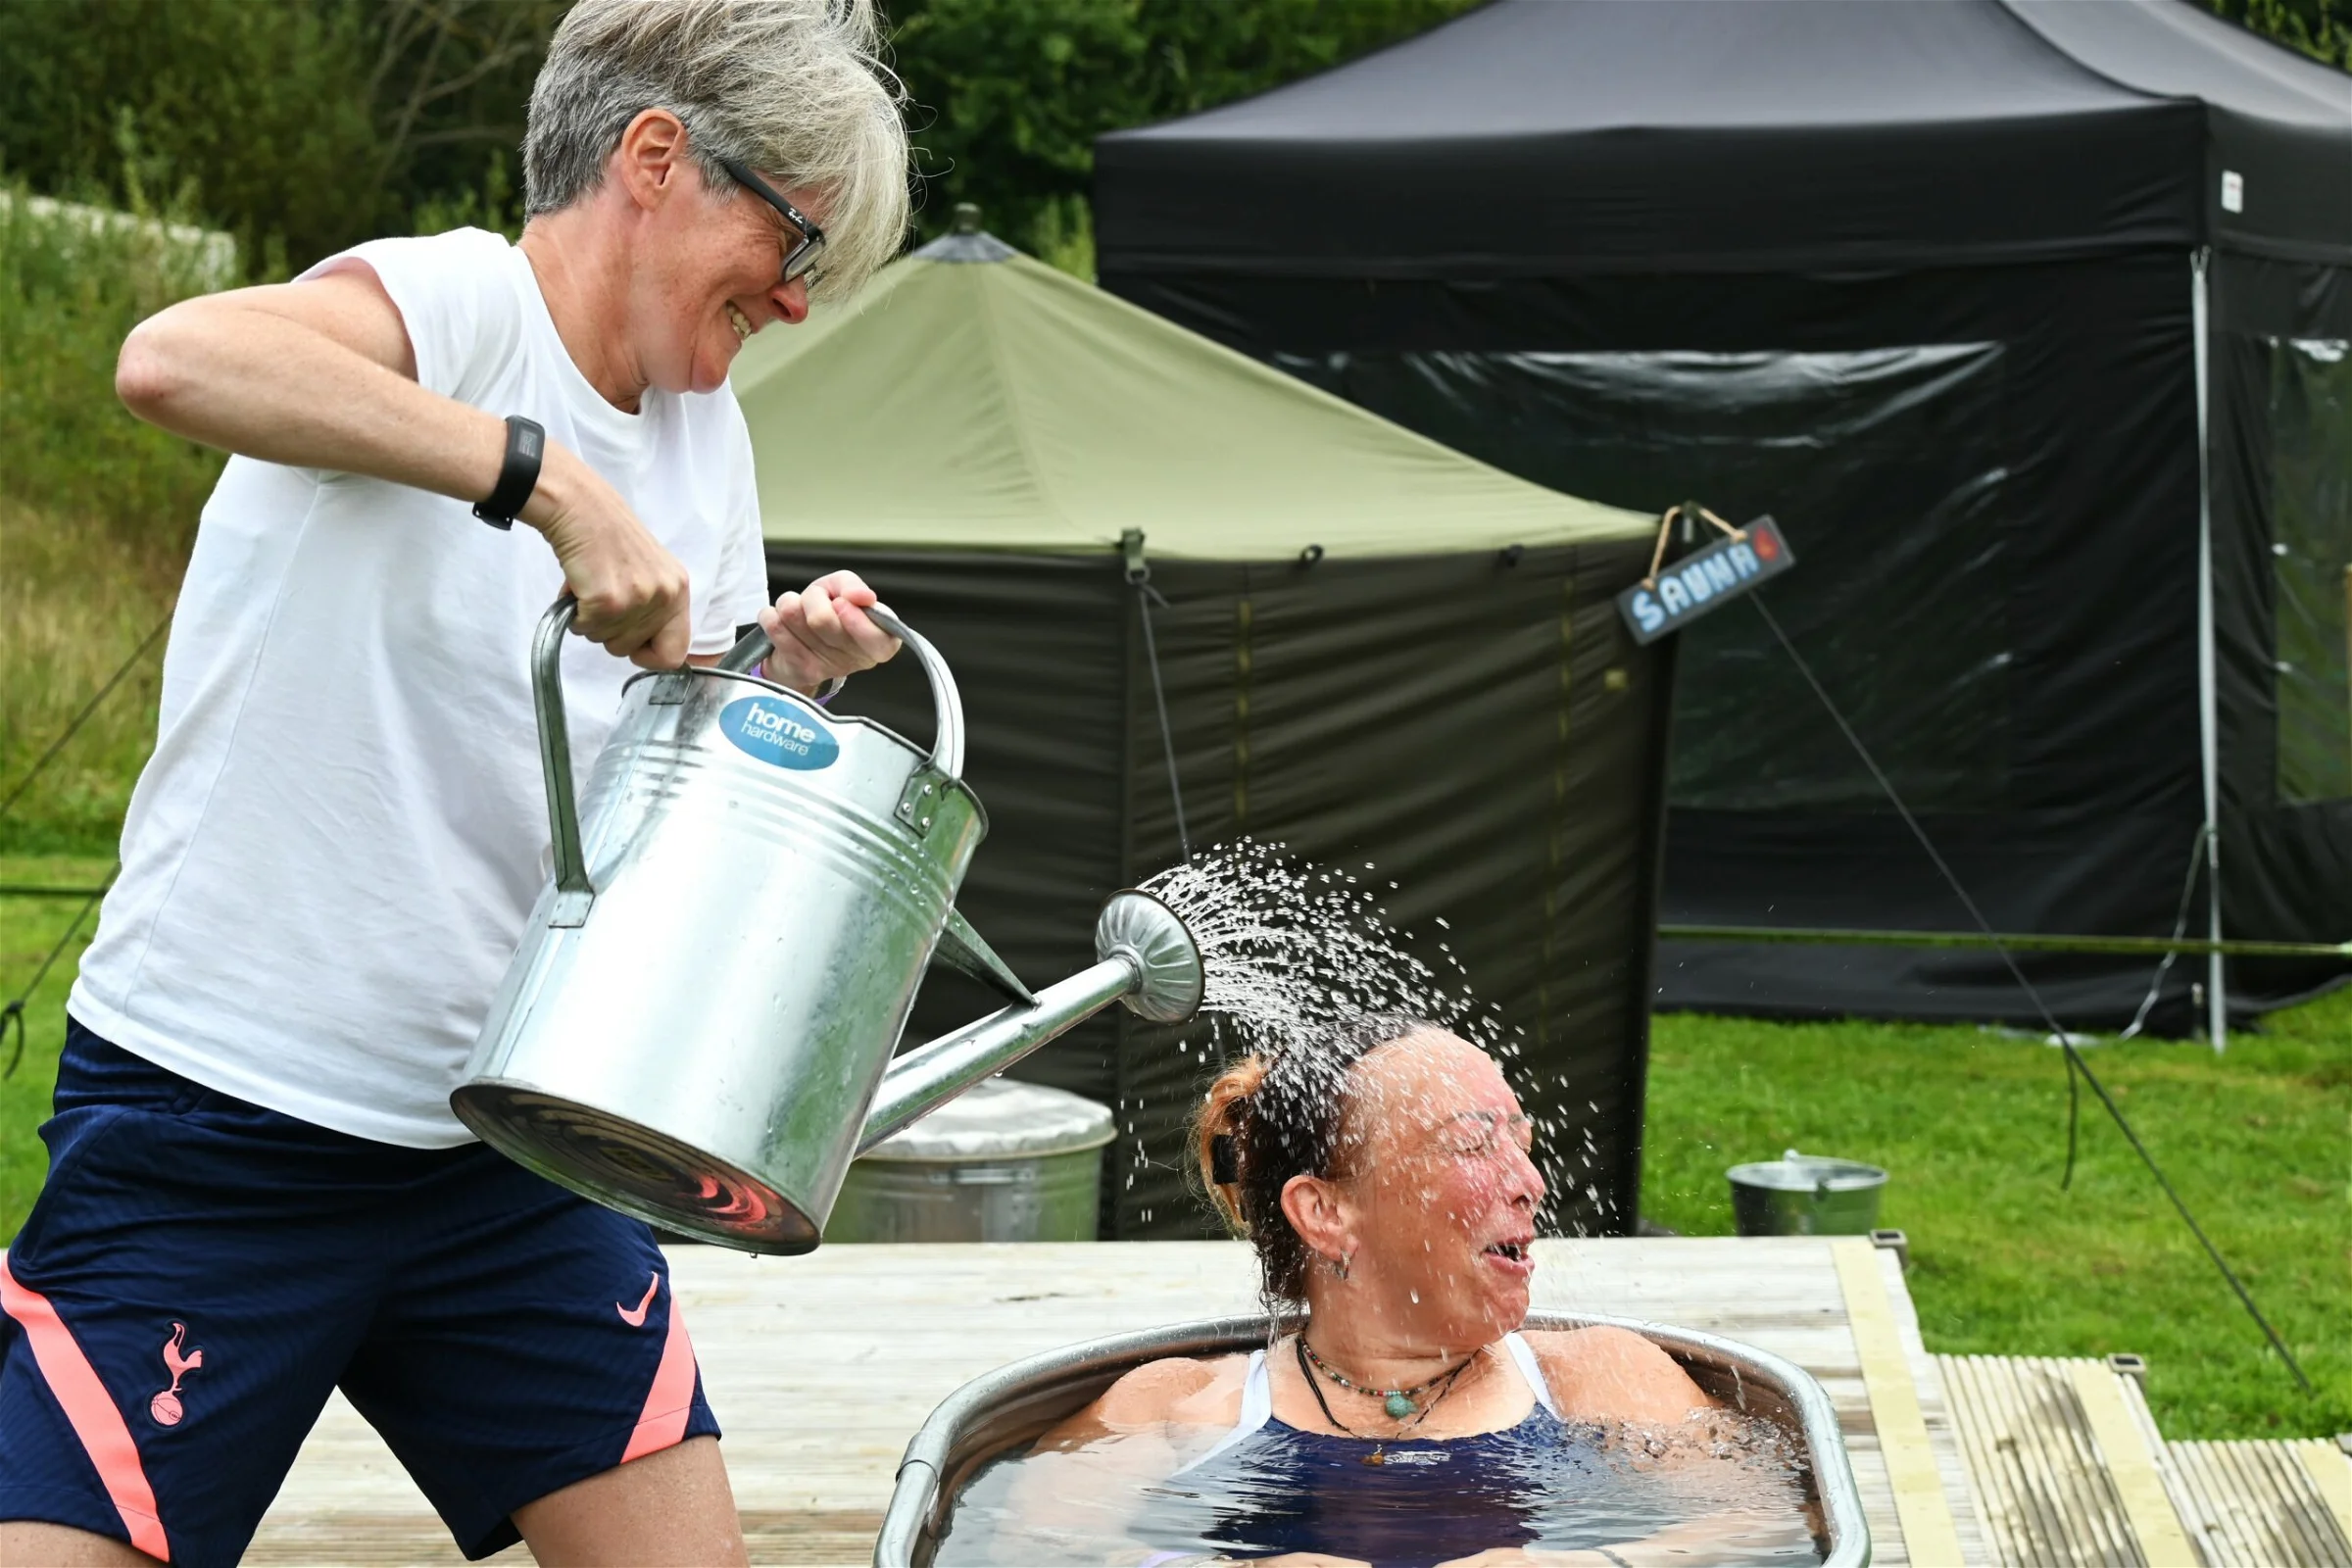 Guest at this year's wellness event sitting in ice bath, with another guest pouring a bucket of water on her.